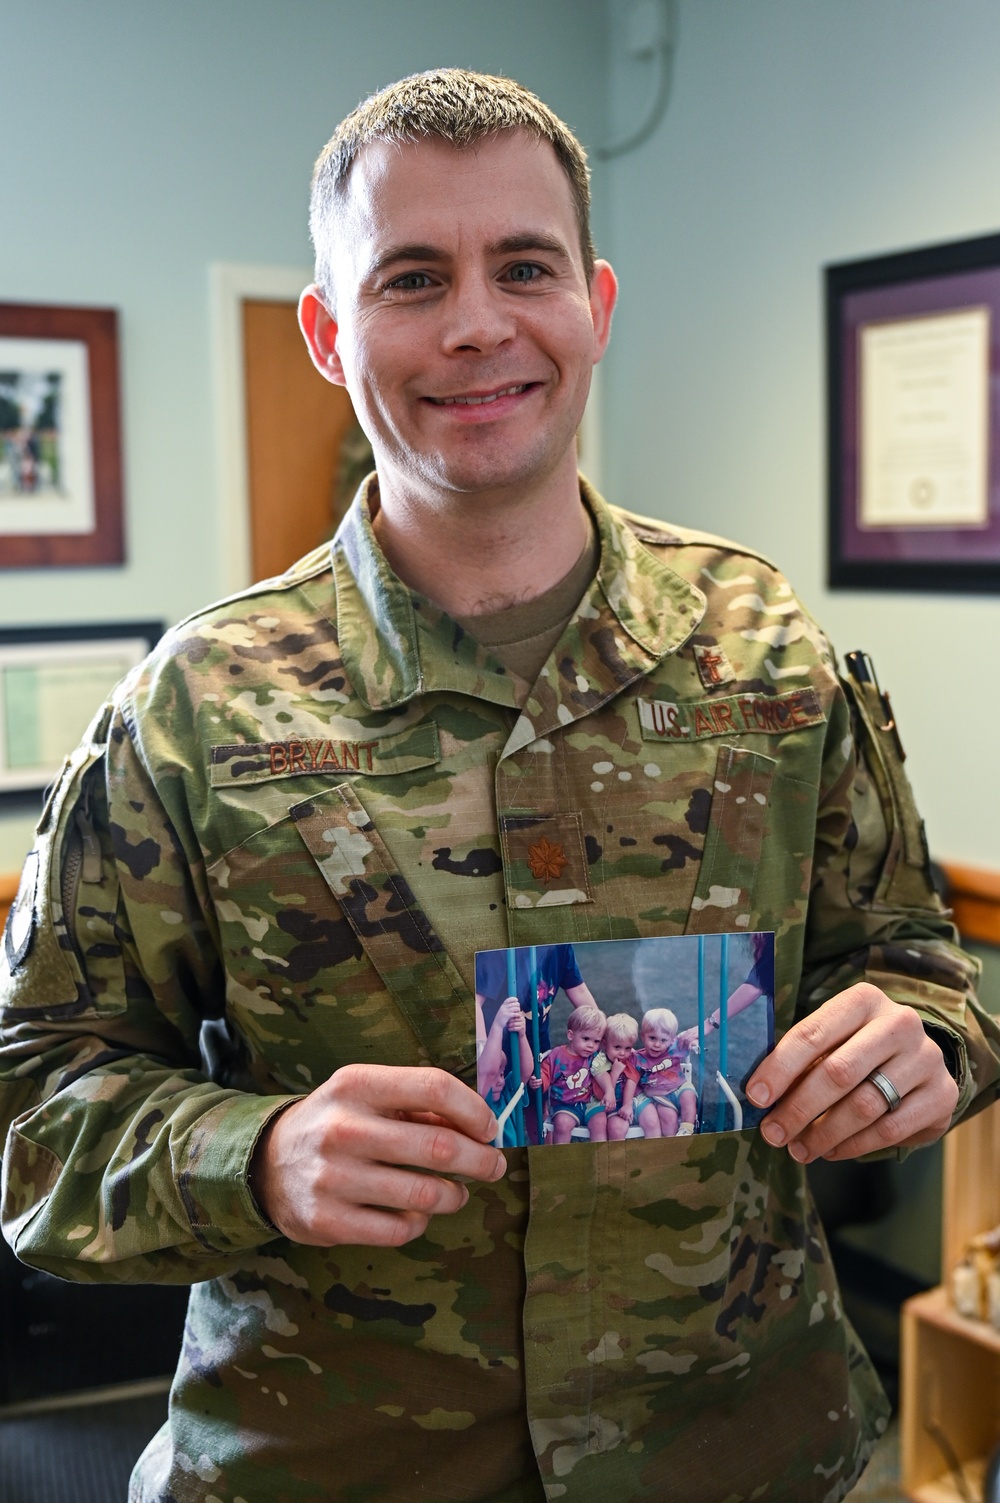 Chaplain holds a photo of his family